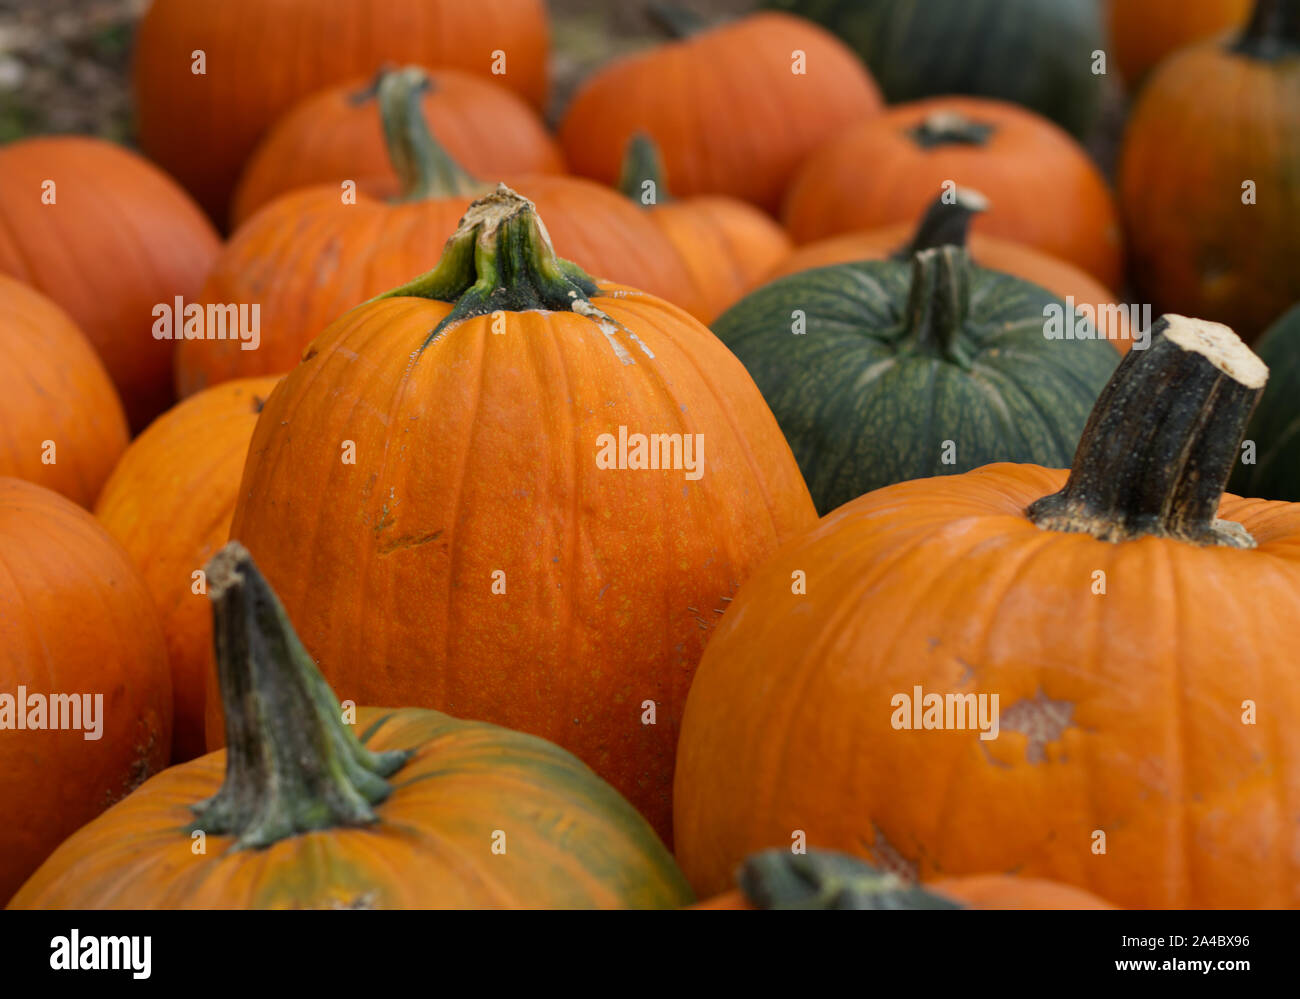 Bright and vibrant orange and green pumpkins in a pumpkin patch at a fall festival. Stock Photo